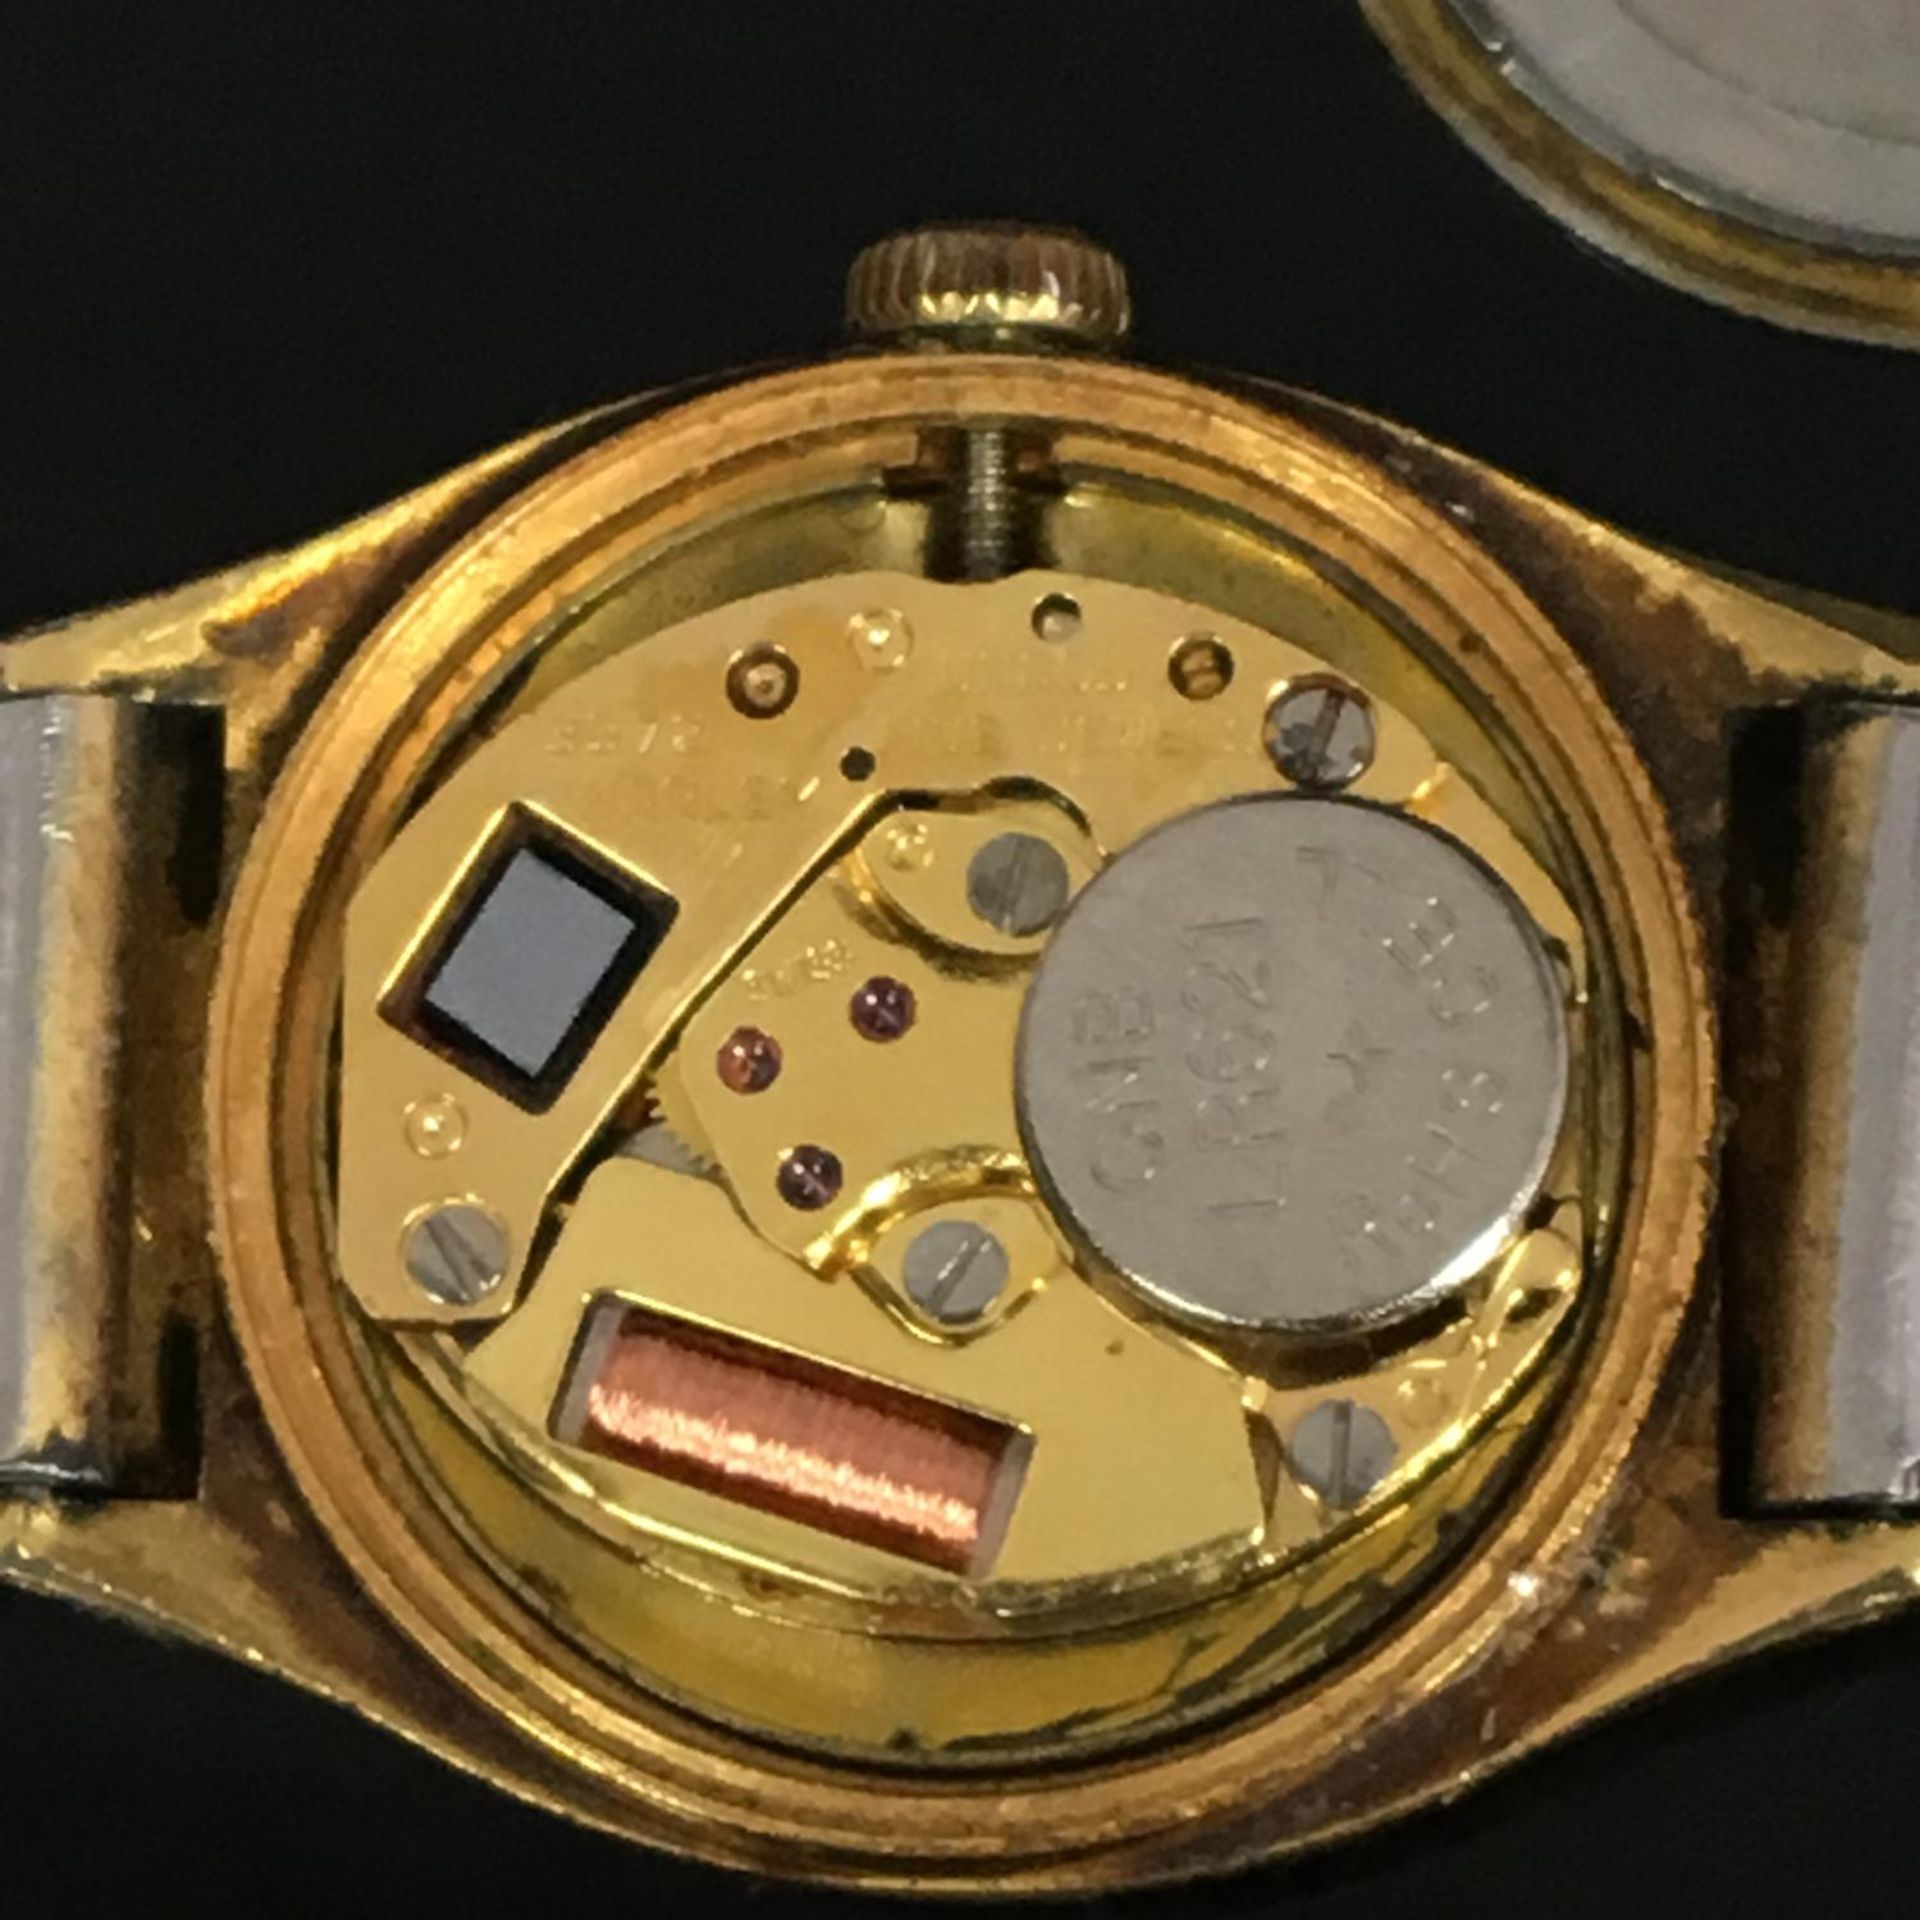 Vintage Vedette ladies watch. Swiss made. Battery powered, runs but needs attention. The movement - Image 2 of 3